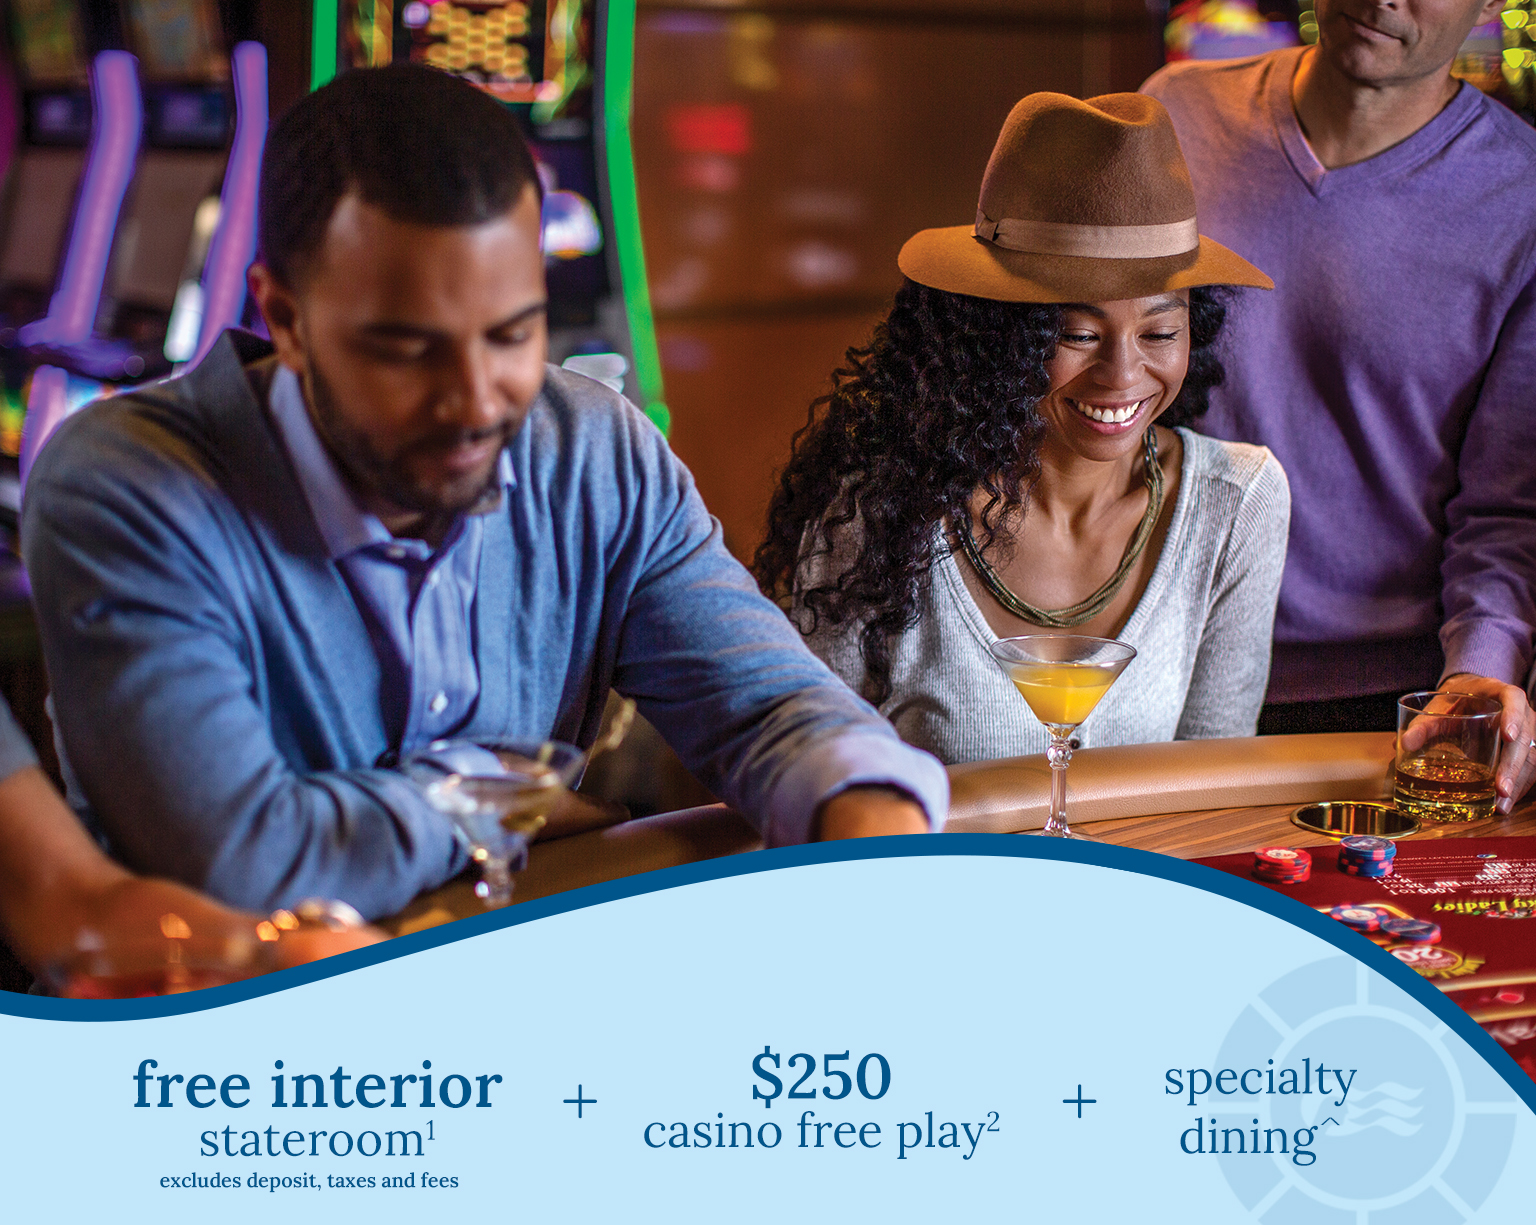 free interior stateroom1 + $250 casino free play2 + specialty dining^